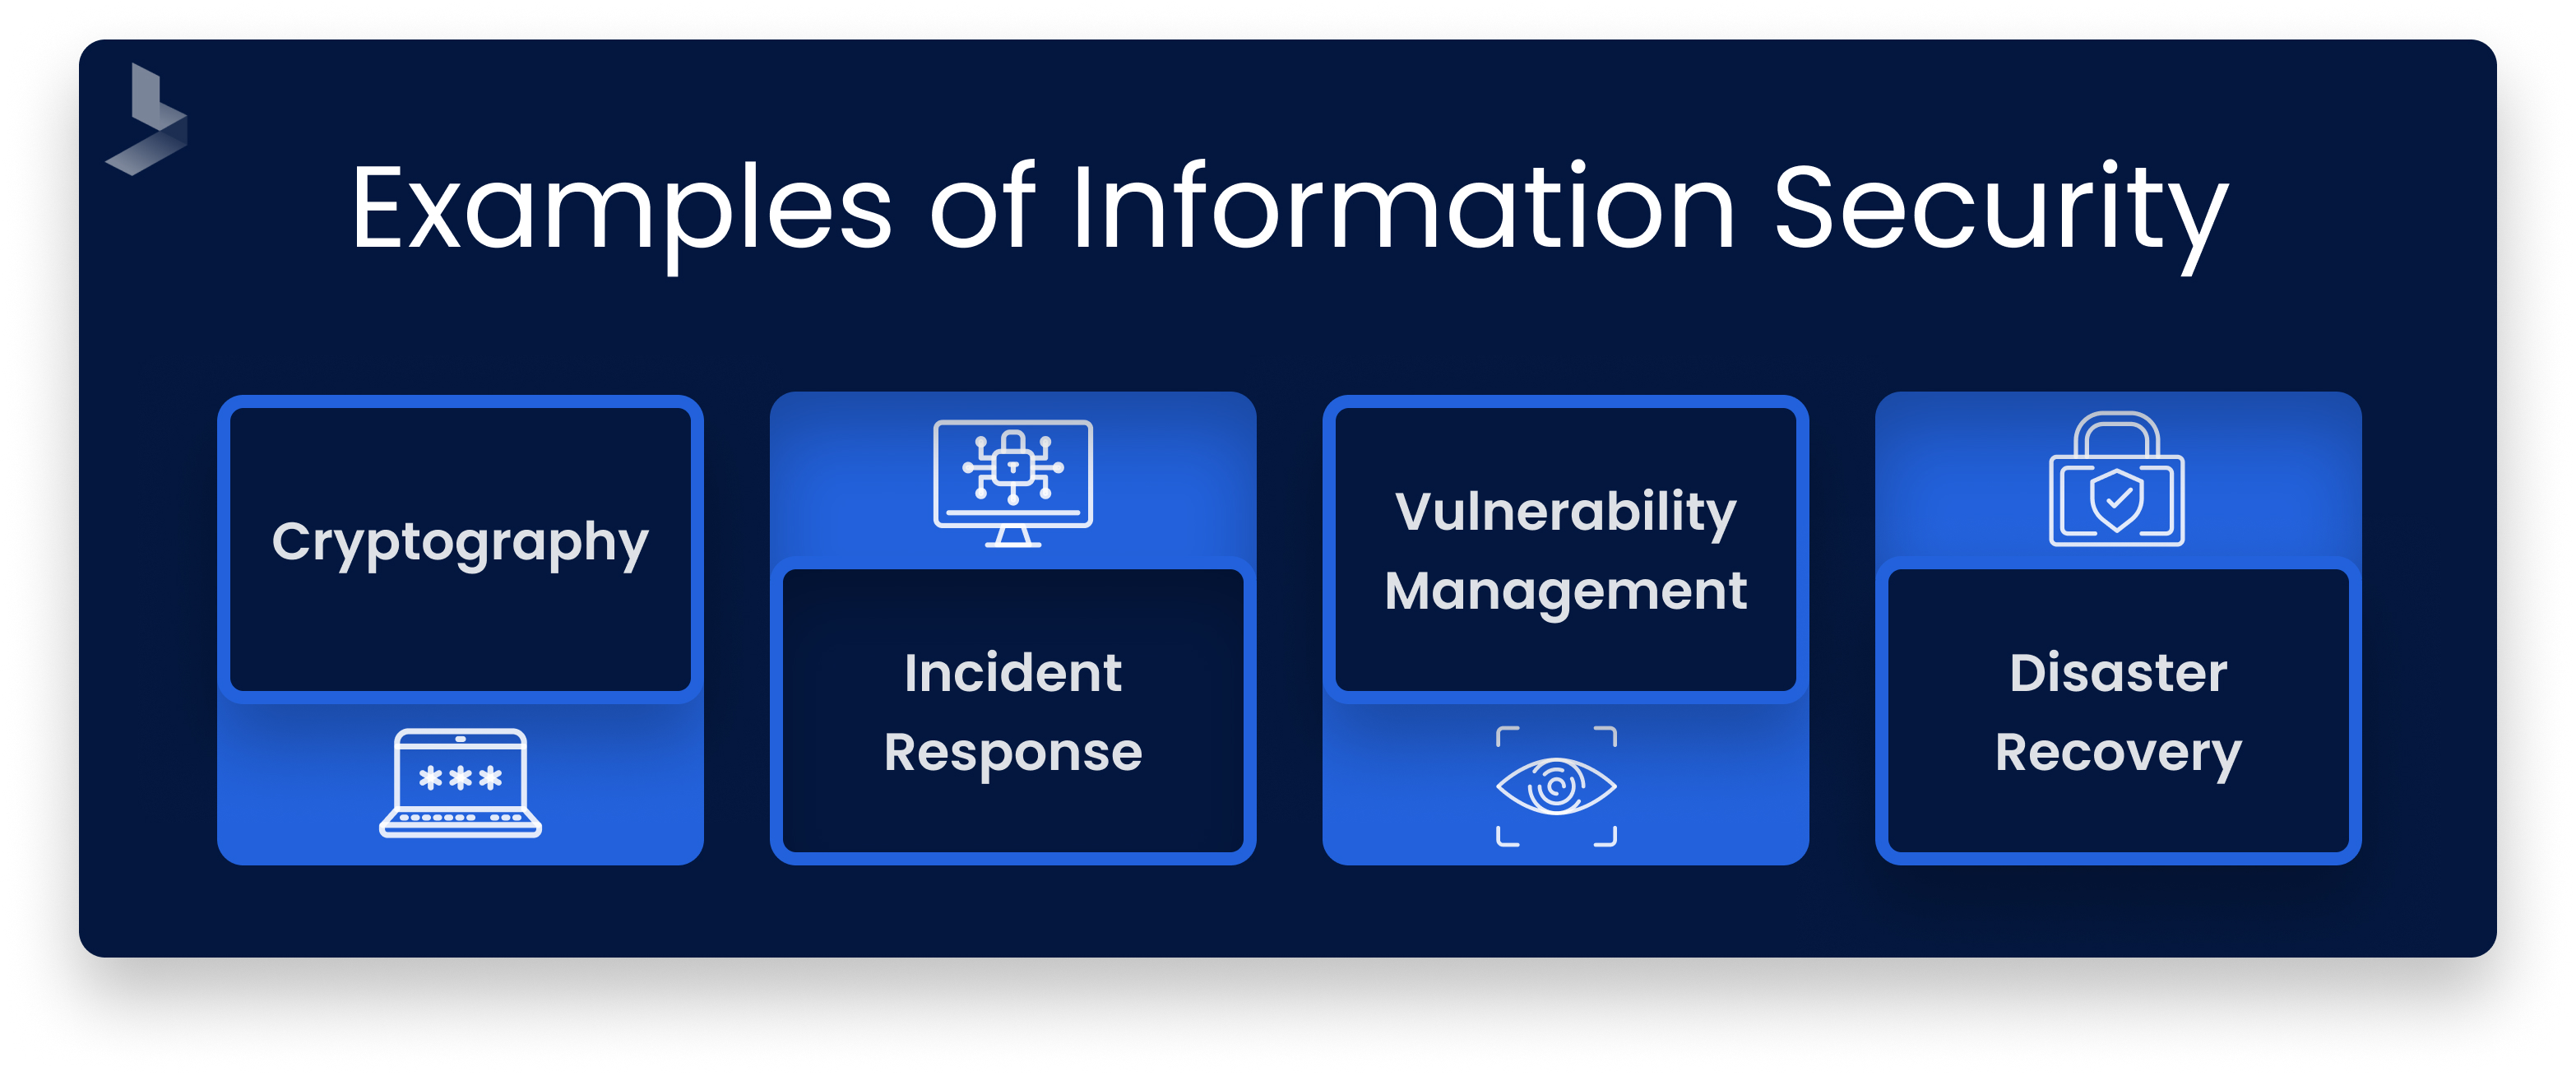 Examples_of_Information_Security